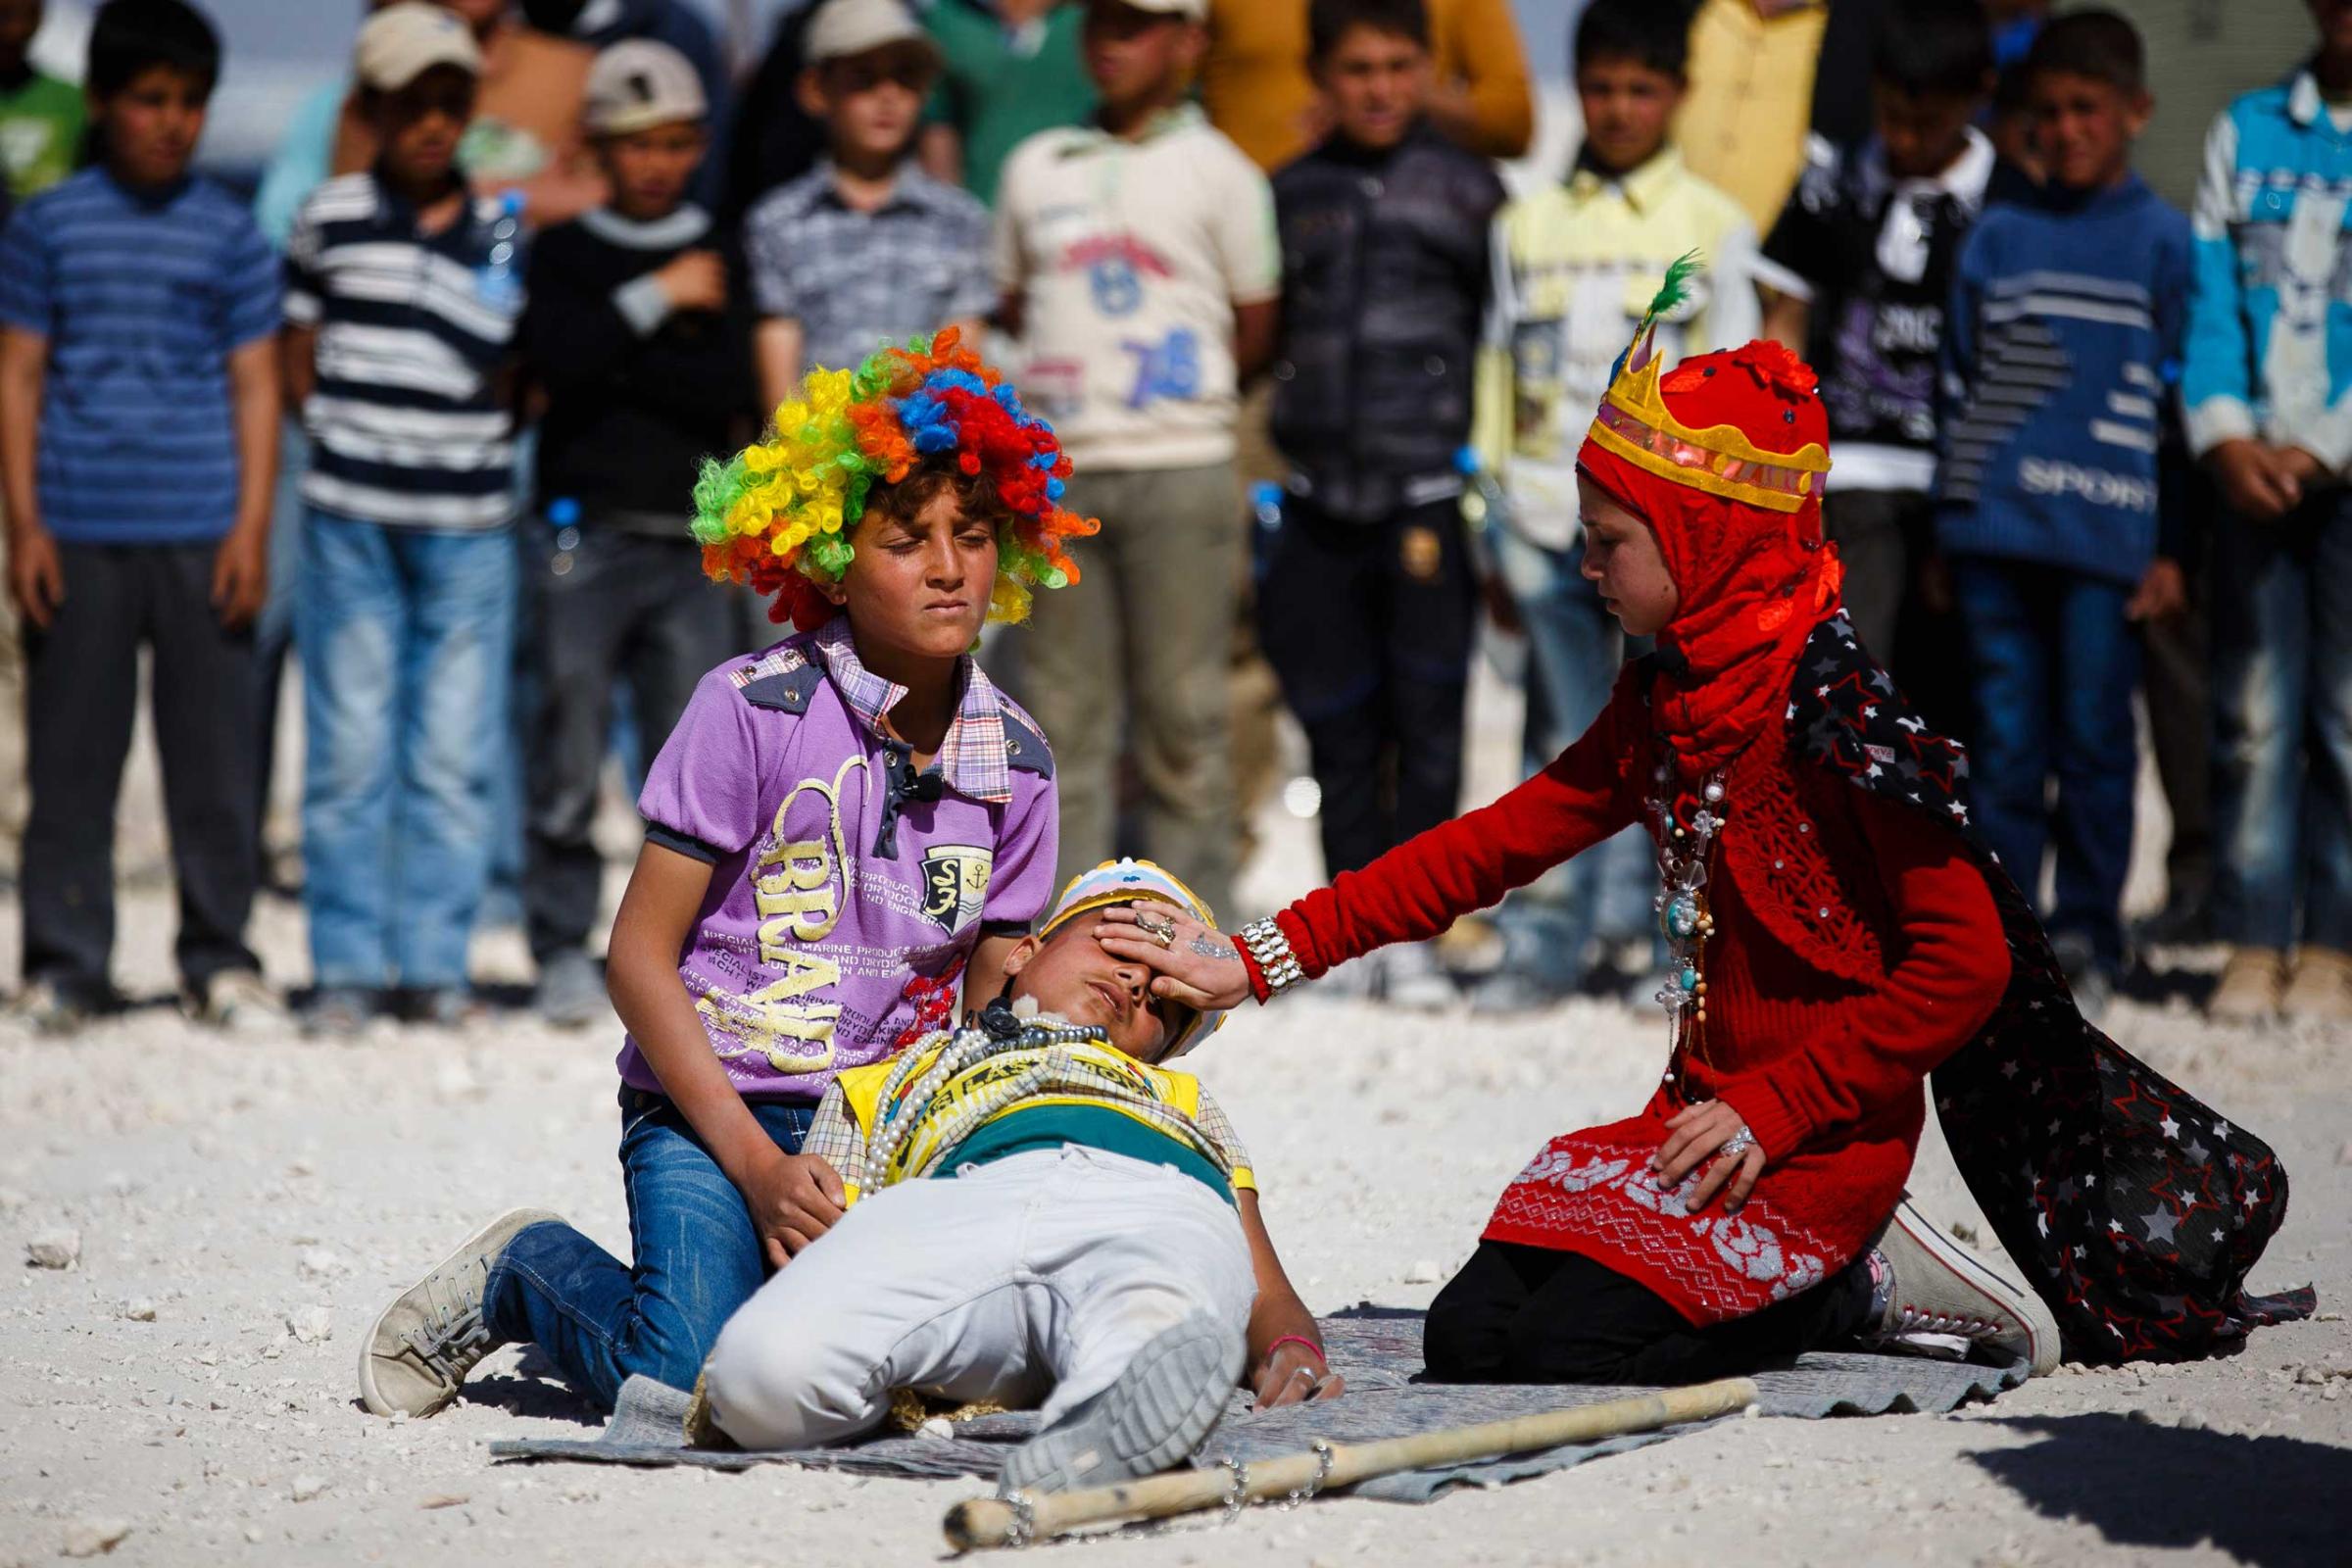 Syrian children perform in an adaptation of Shakespeare's "King Lear" at the Zaatari Refugee Camp in Mafraq, Jordan.